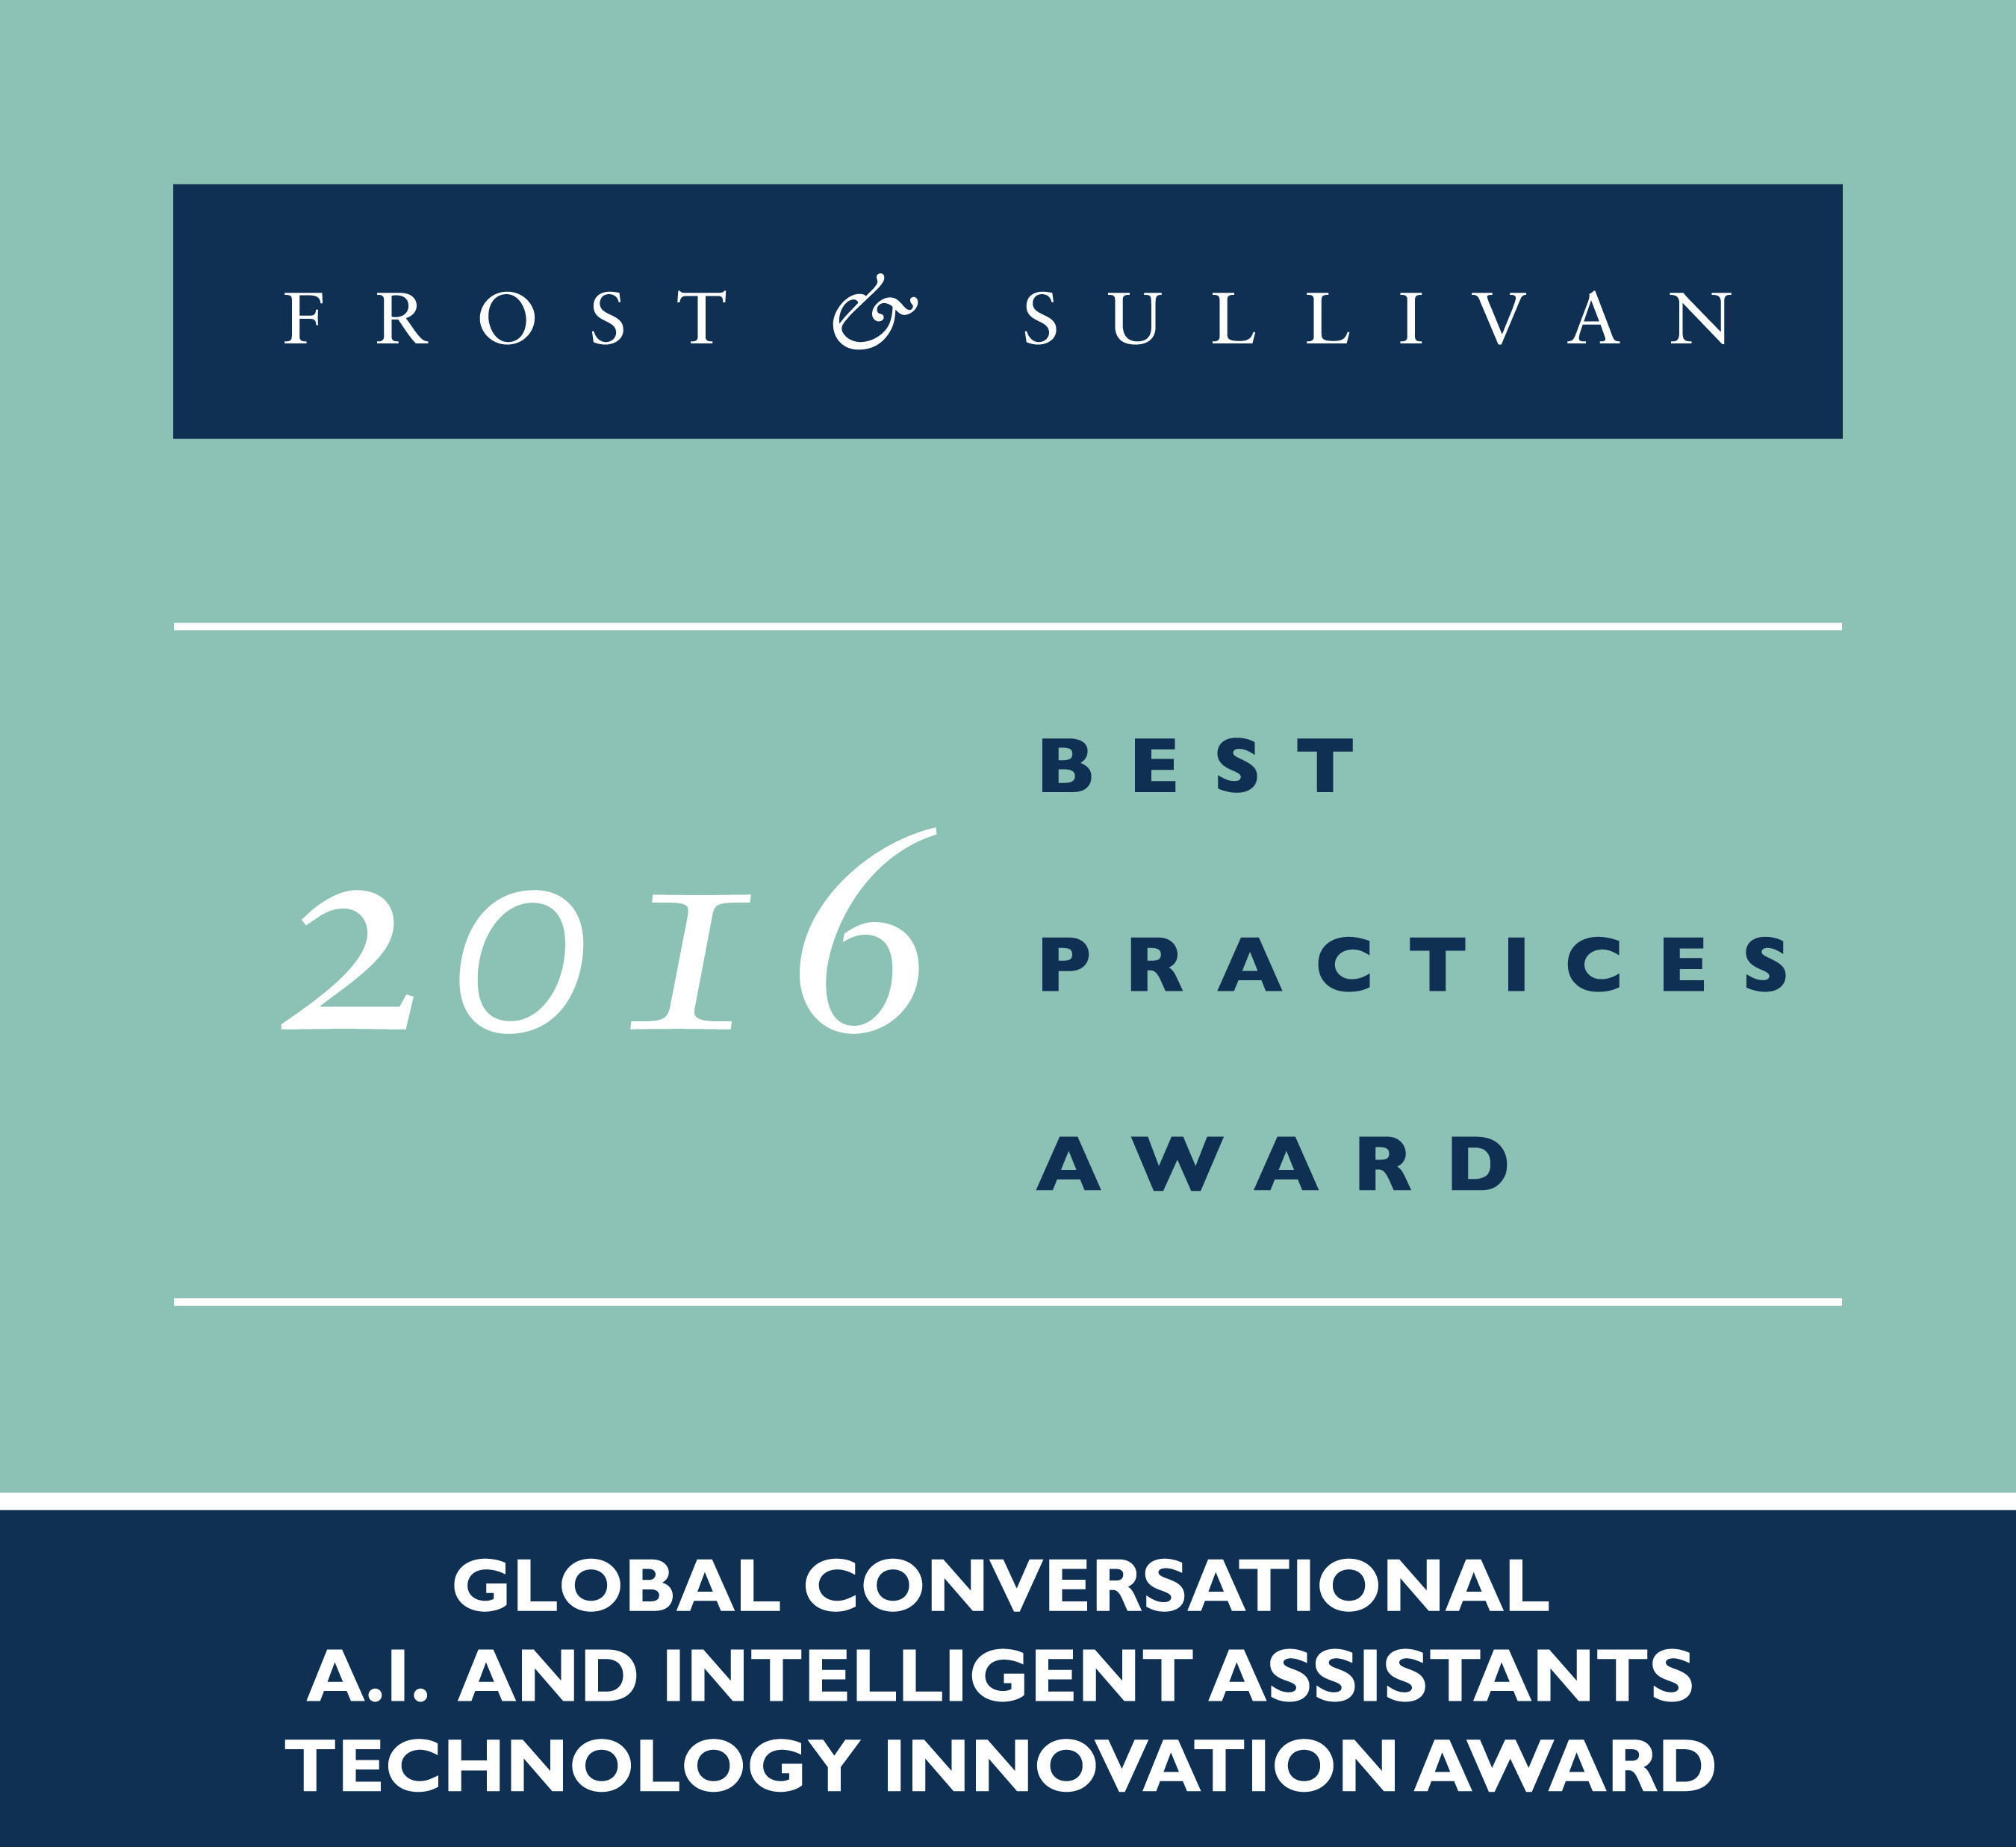 Next IT Receives 2016 Global Conversational A.I. and Intelligent Assistants Technology Innovation Award